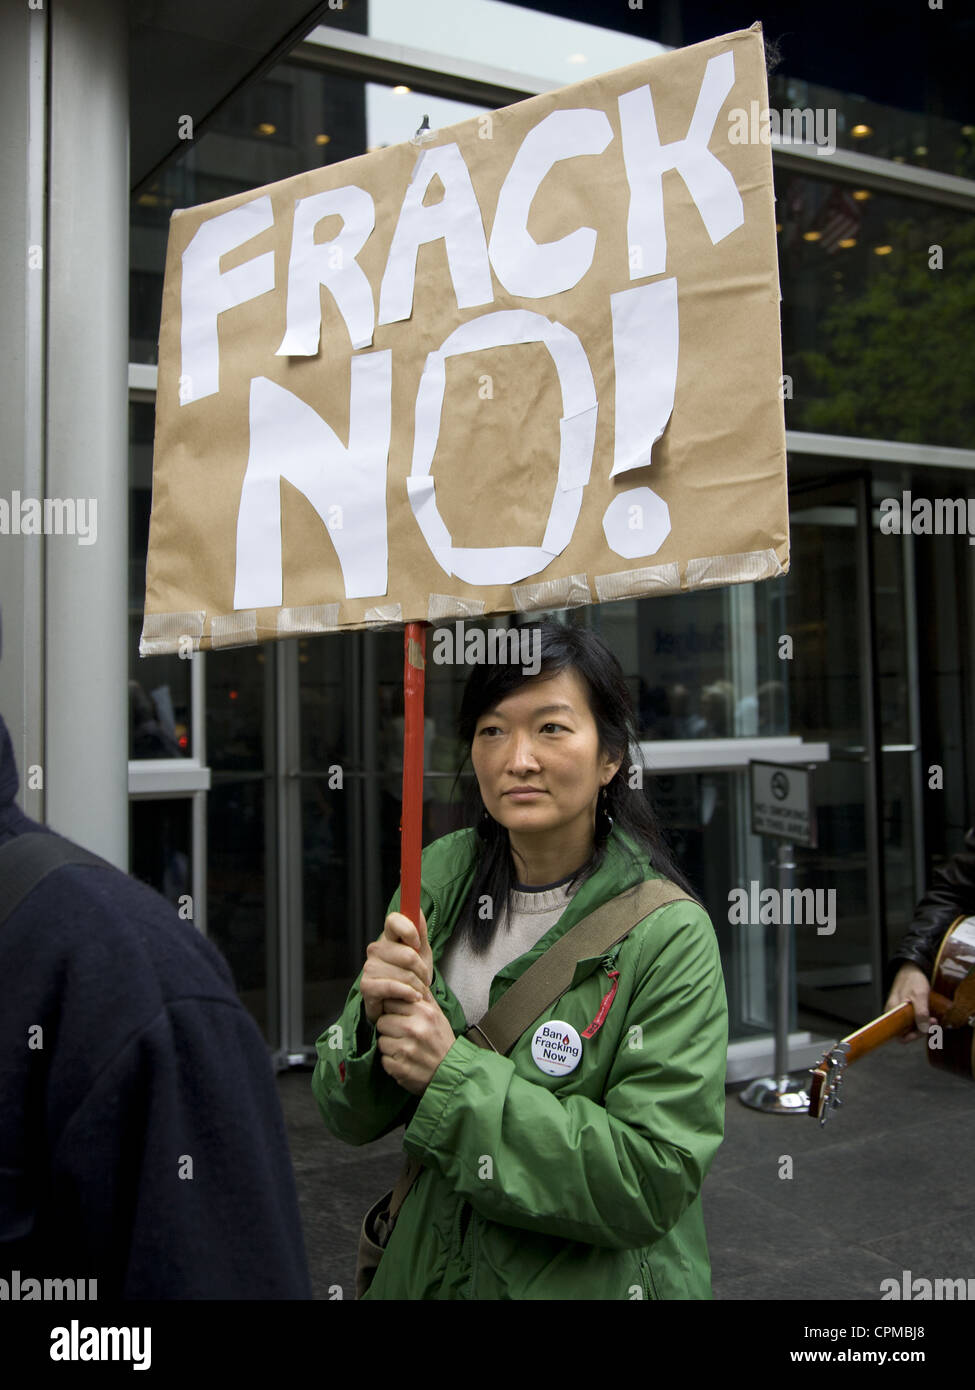 Environmental activists demonstrate in front of Gov. Cuomo's NYC office urging him to ban Fracking in New York State. Stock Photo